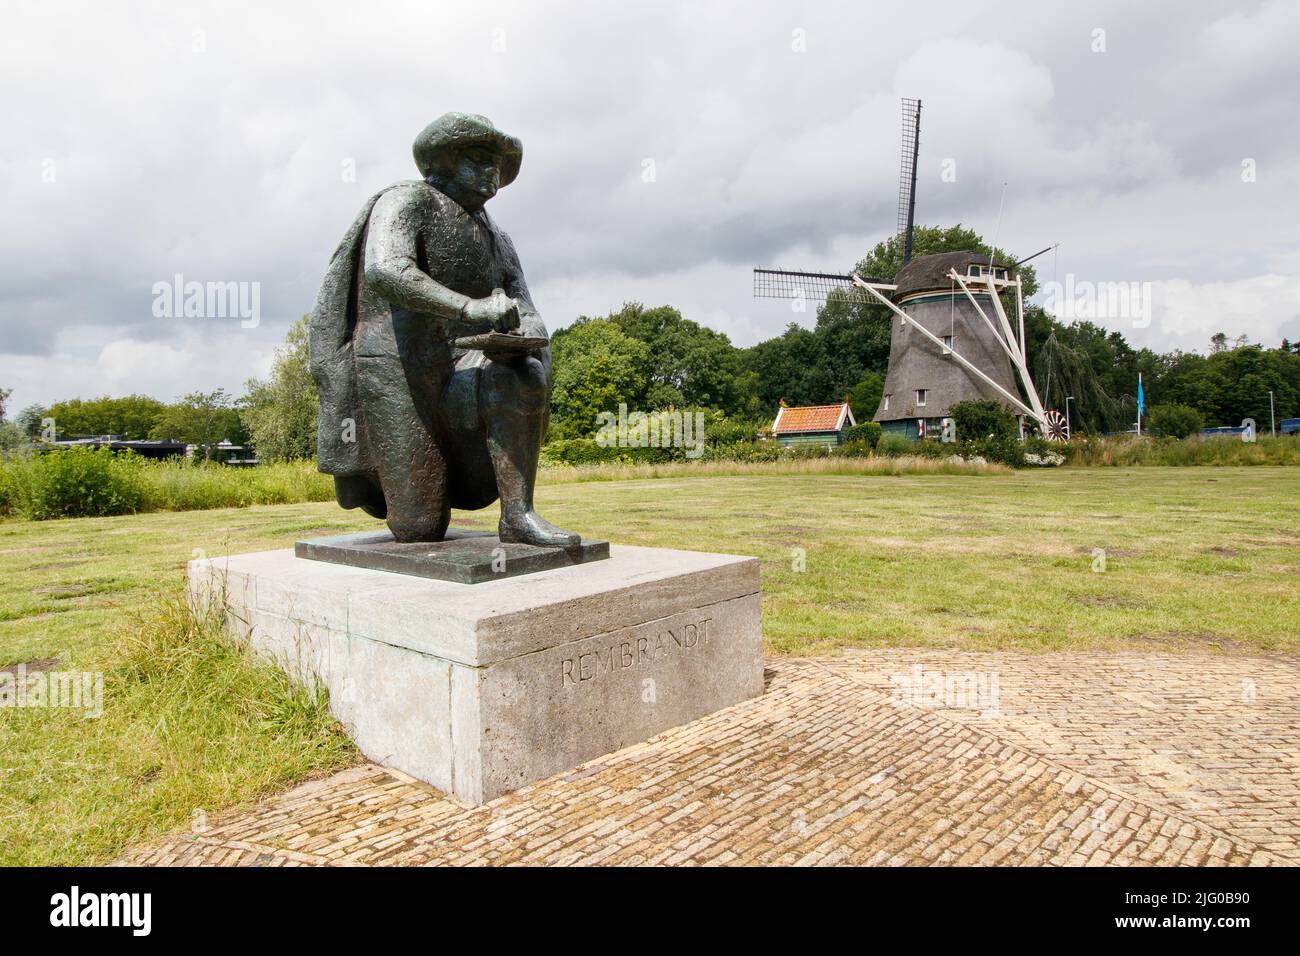 The Rembrandt statue in the area south of Amsterdam where the river Amstel flows south. The famous painter Rembrandt had a house her alongside the river and it is thought a lot of inspiration for his paintings started here. Stock Photo